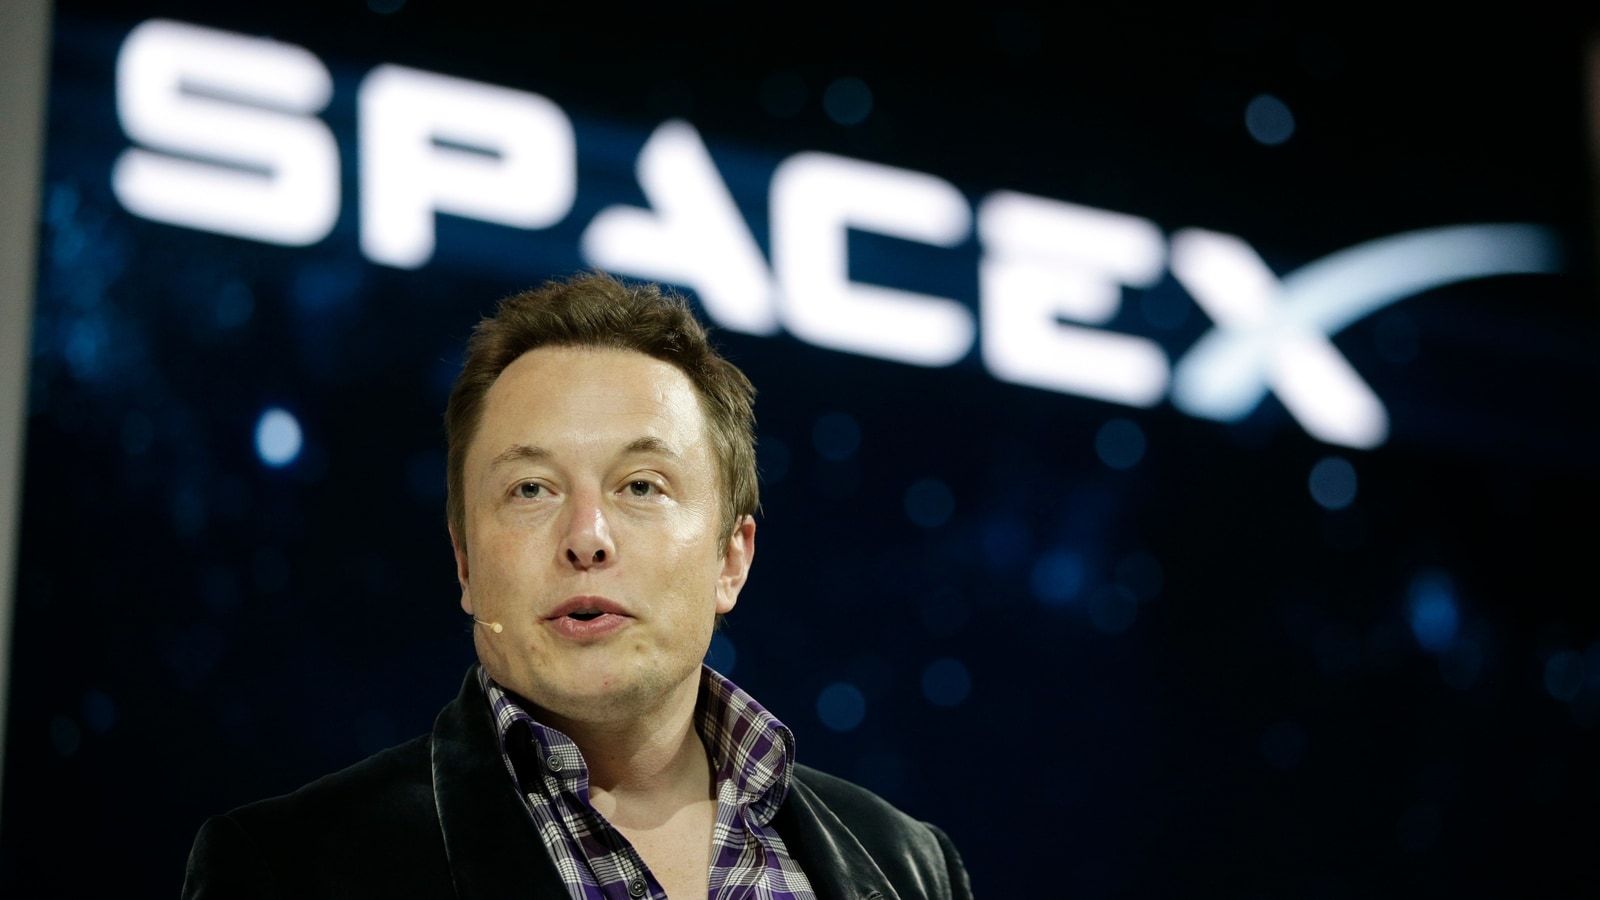 Elon Musk-led SpaceX Illegally Fired Workers Who Criticized Him In A Letter, NLRB Alleges